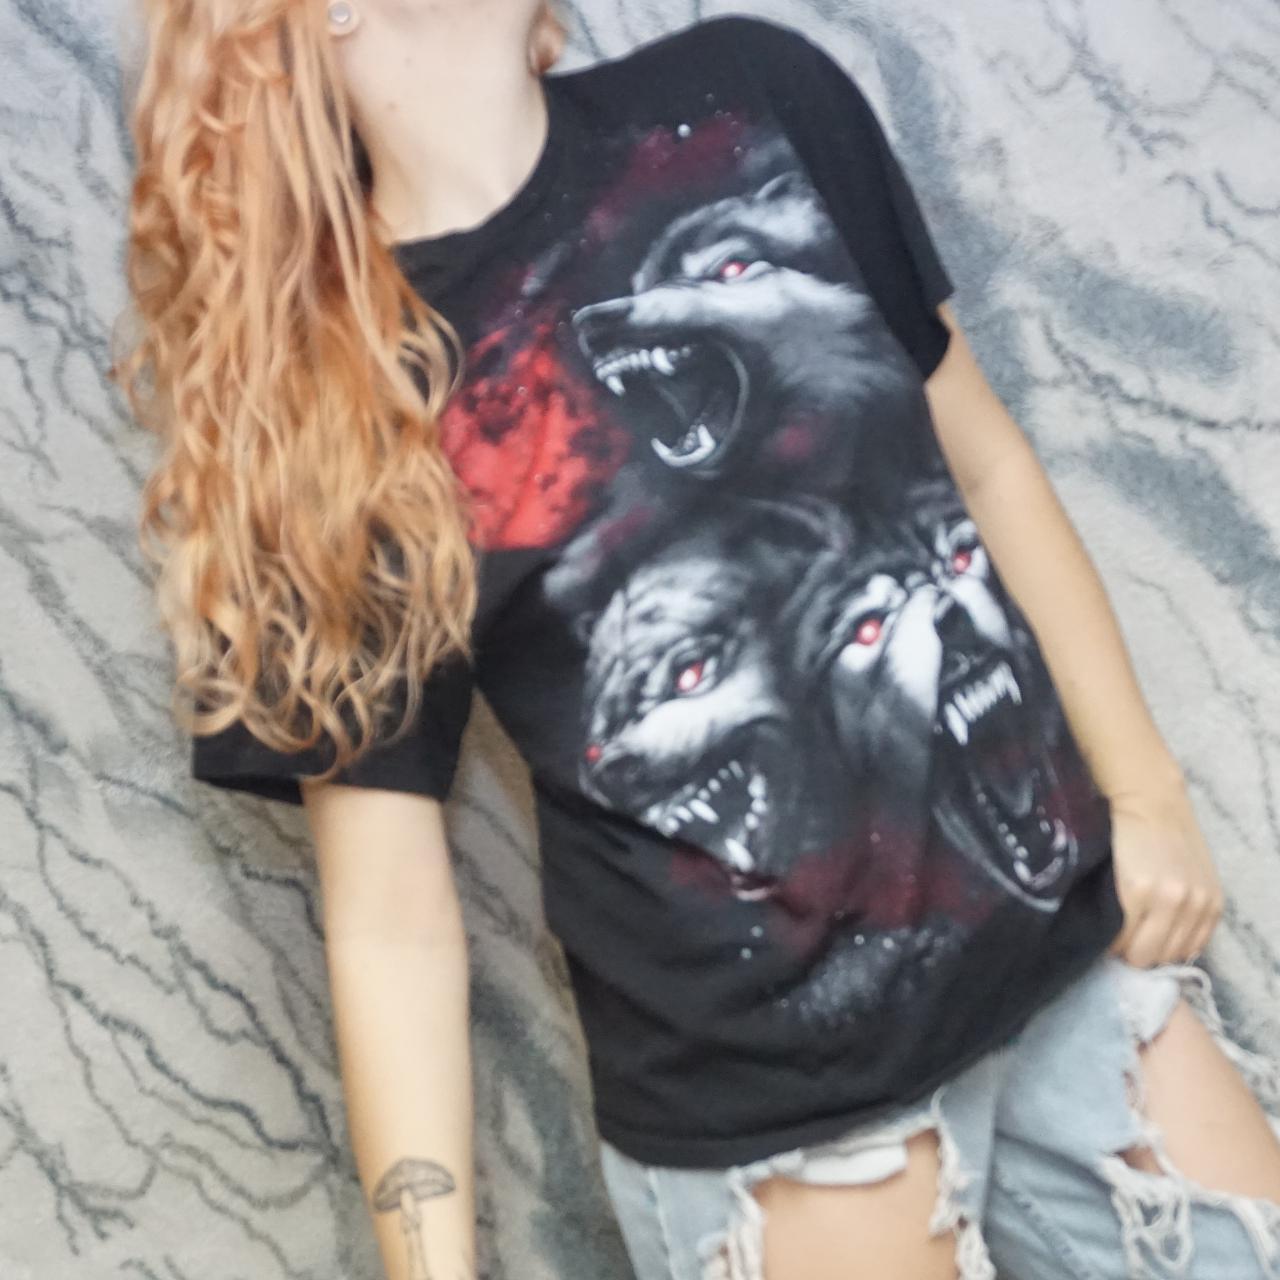 Product Image 2 - Blood Moon Wolf T
Size M

*Tagless.